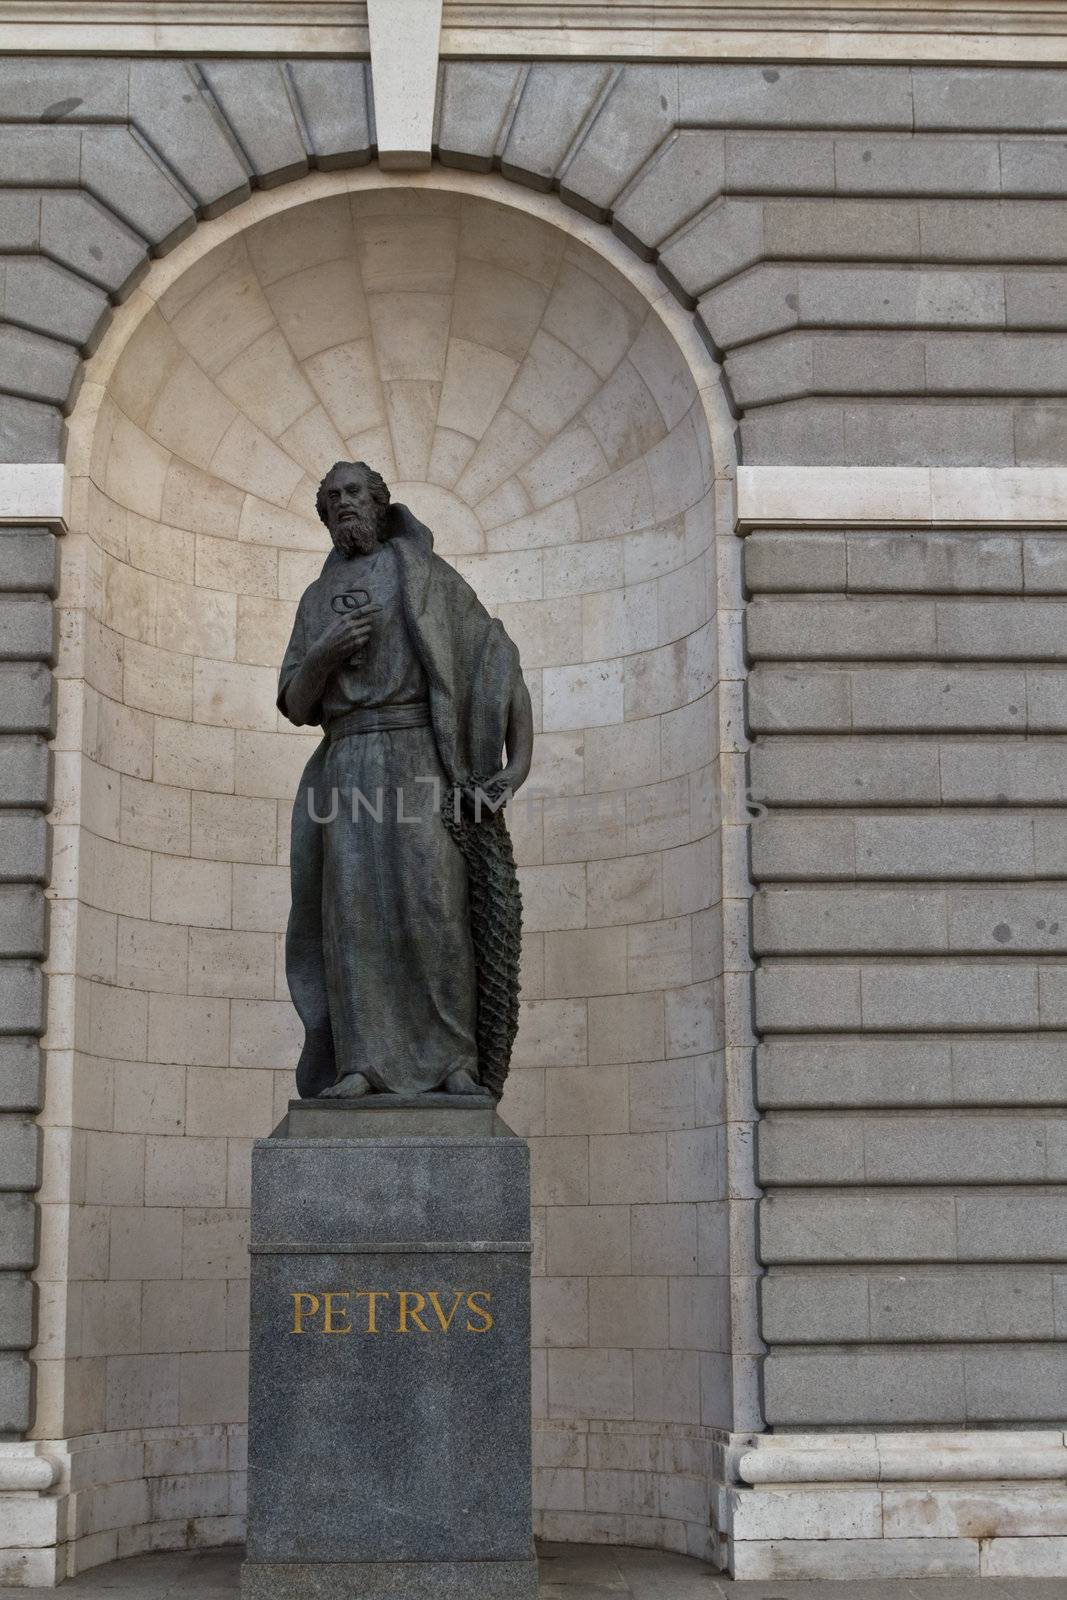 A statue of Petrus, Jesus' disciple, outside the cathedral of Madrid